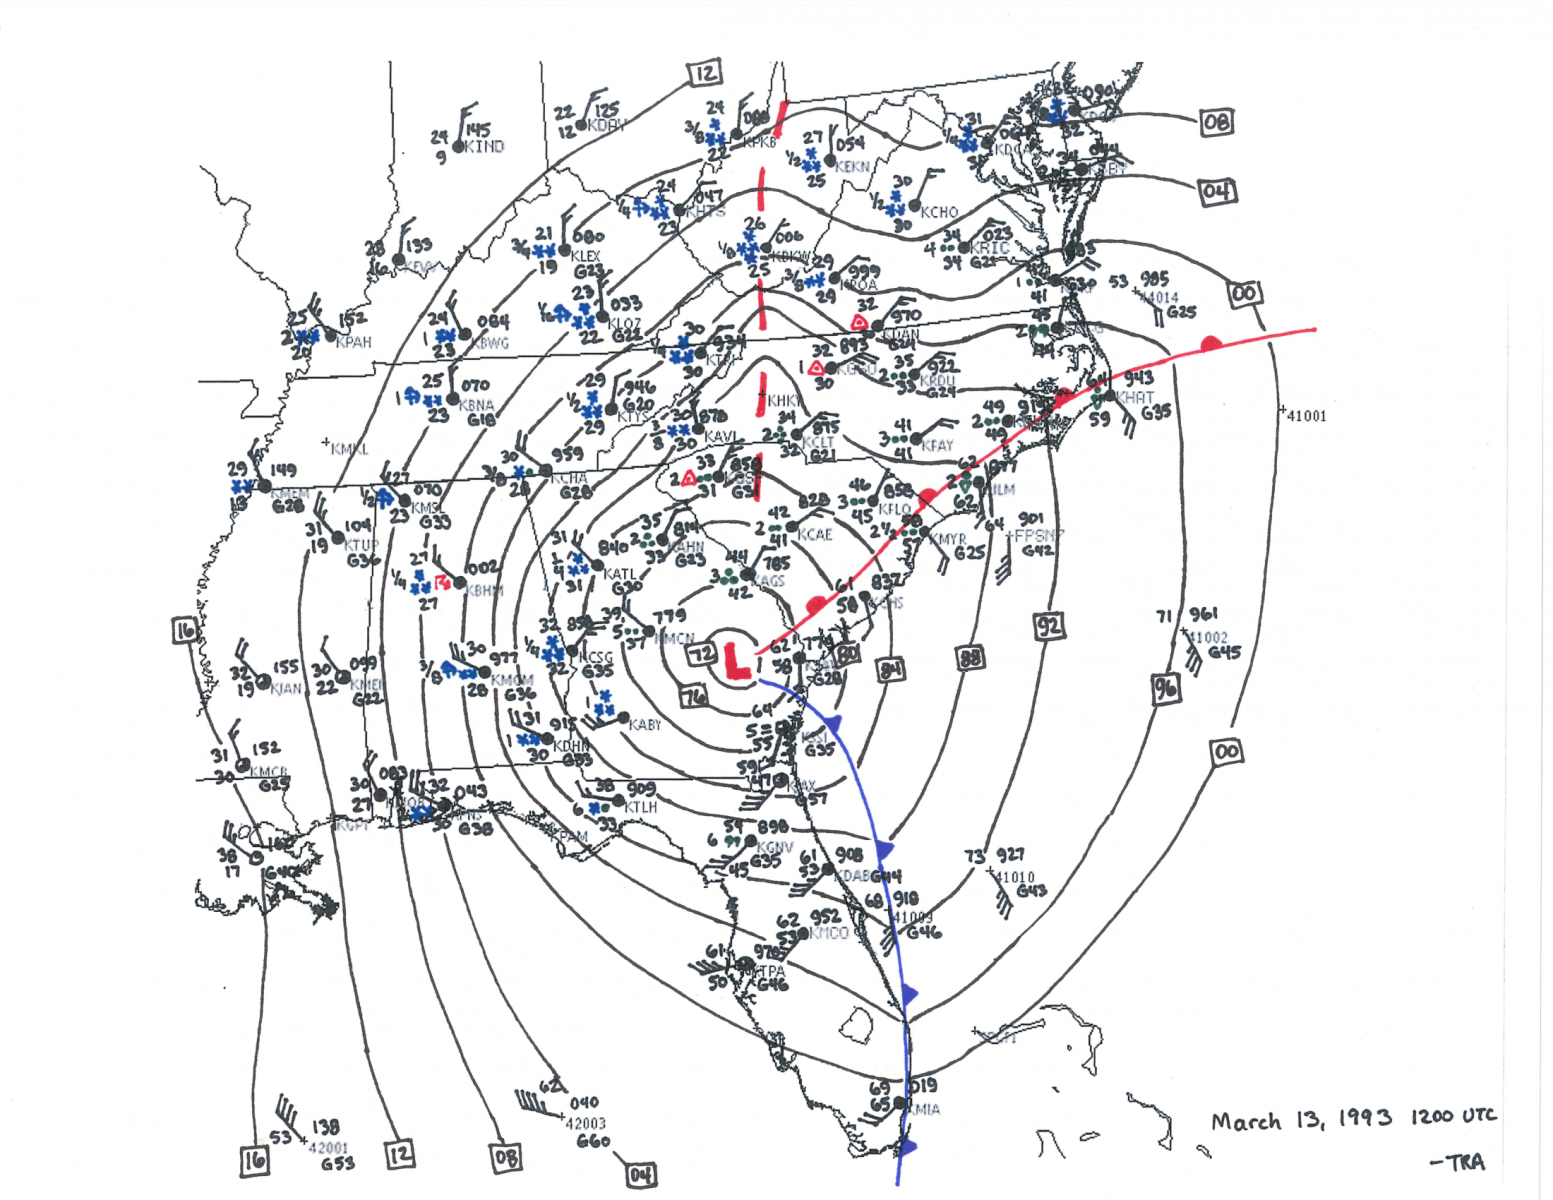 1993 Storm of the Century Surface Analysis at 7 AM March 13, 1993